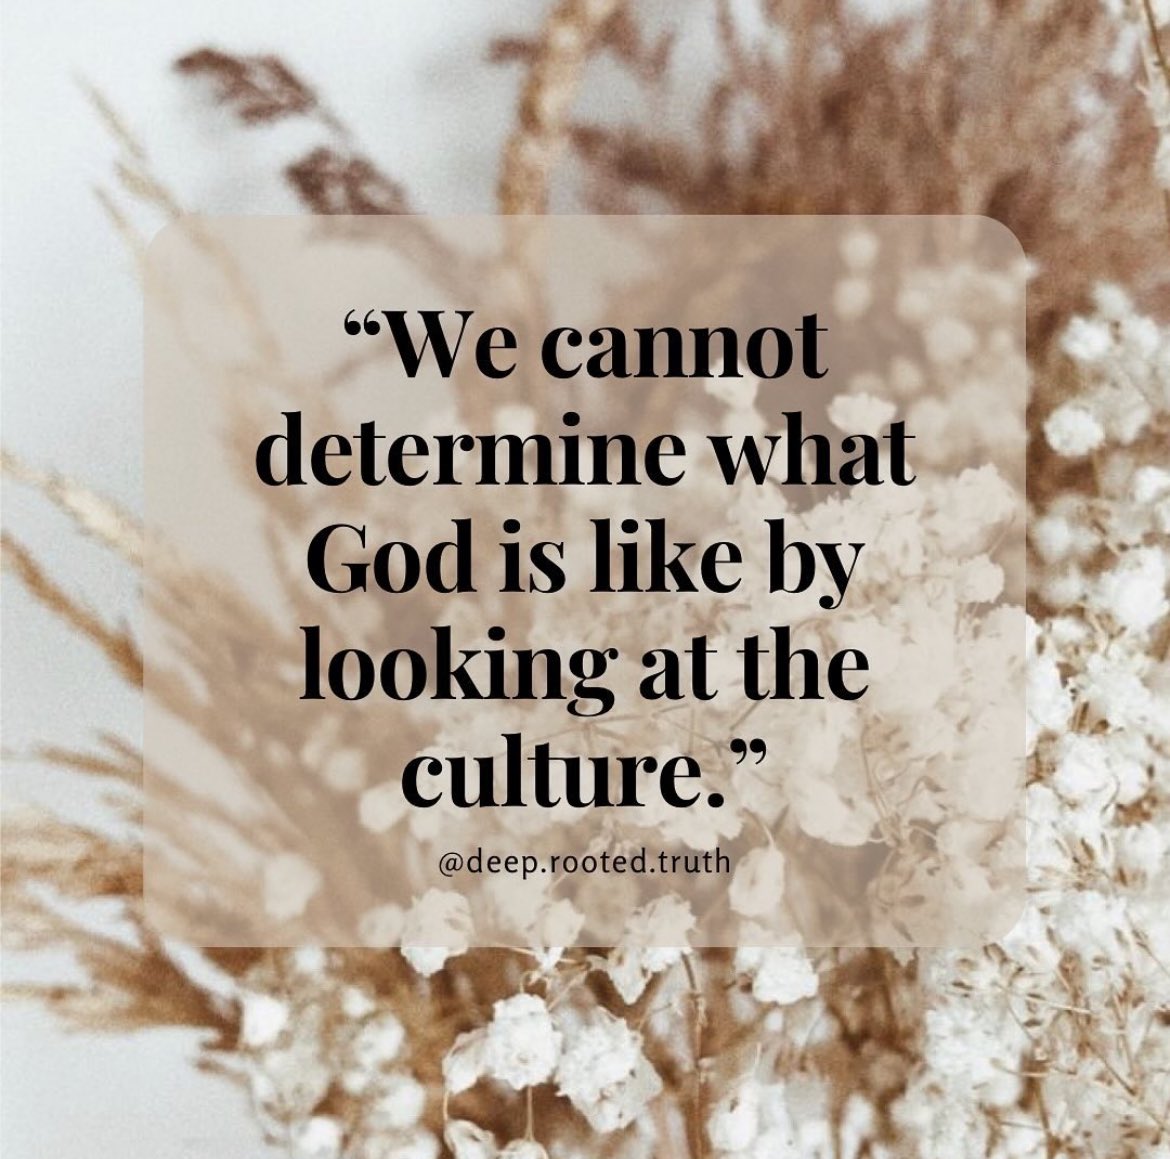 This is so true. This culture has completely removed God. That is why society has decayed. Let's put God back in. ❤️